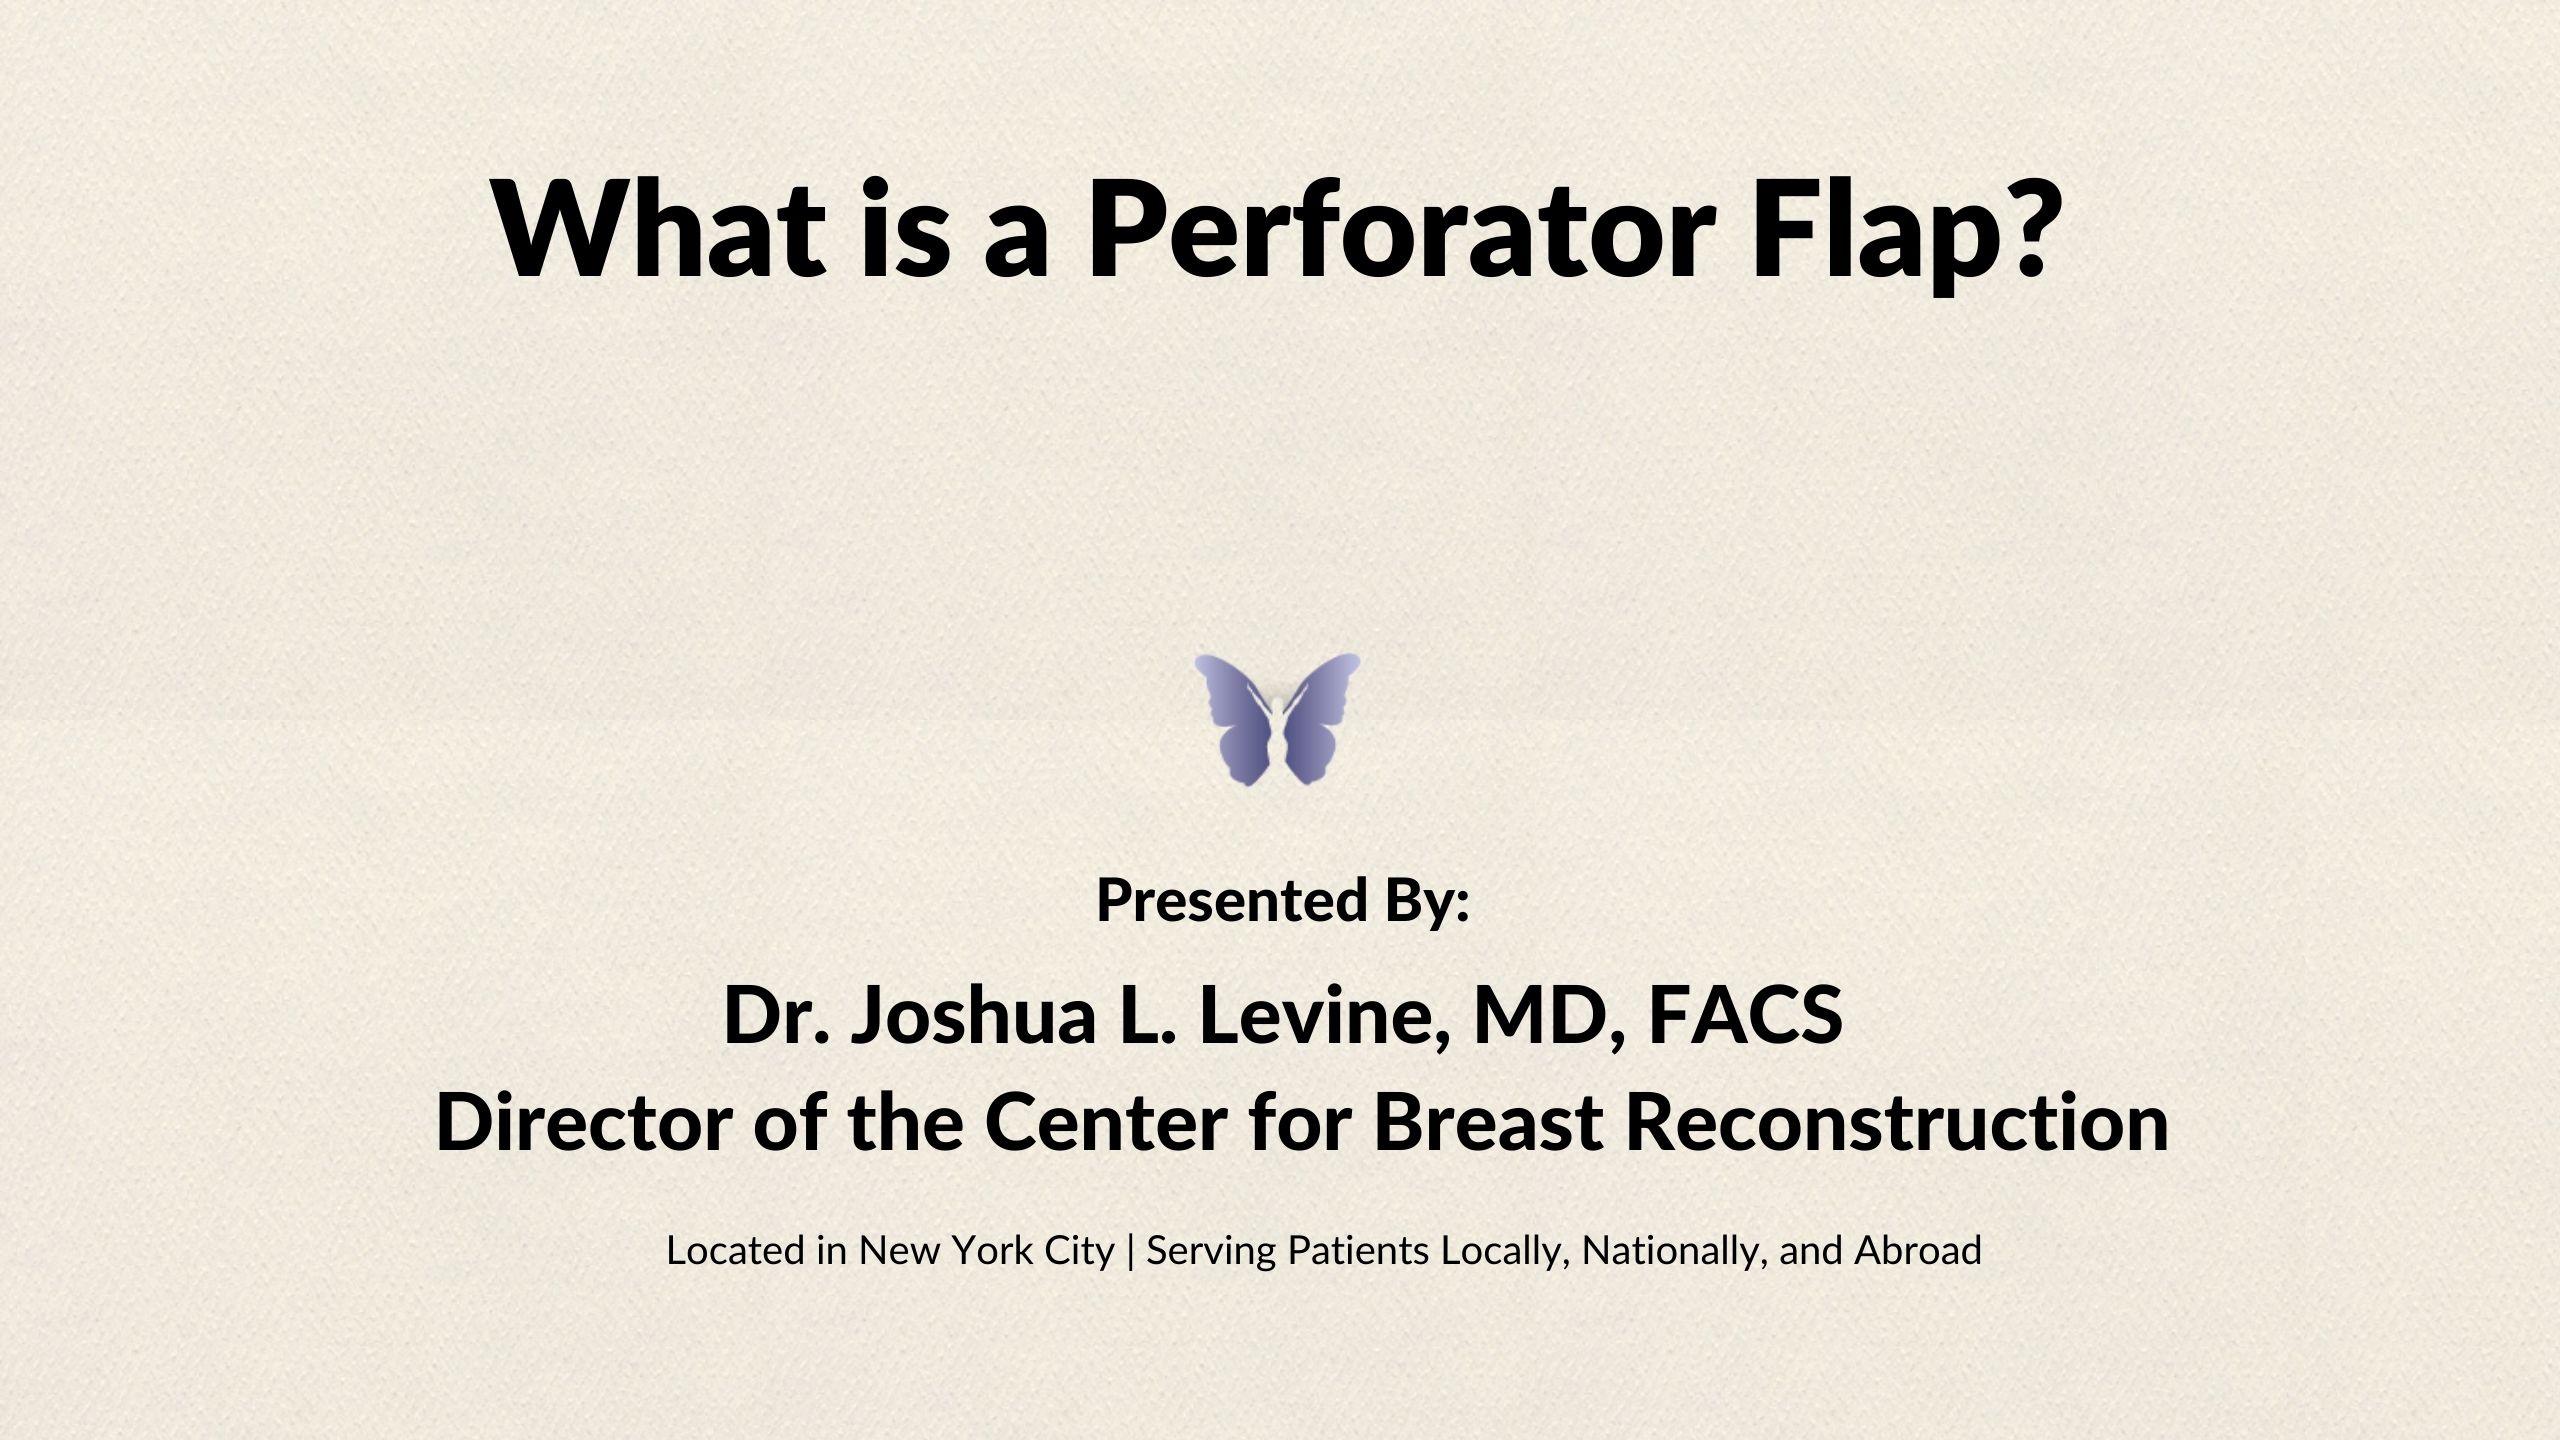 What is a Perforator Flap